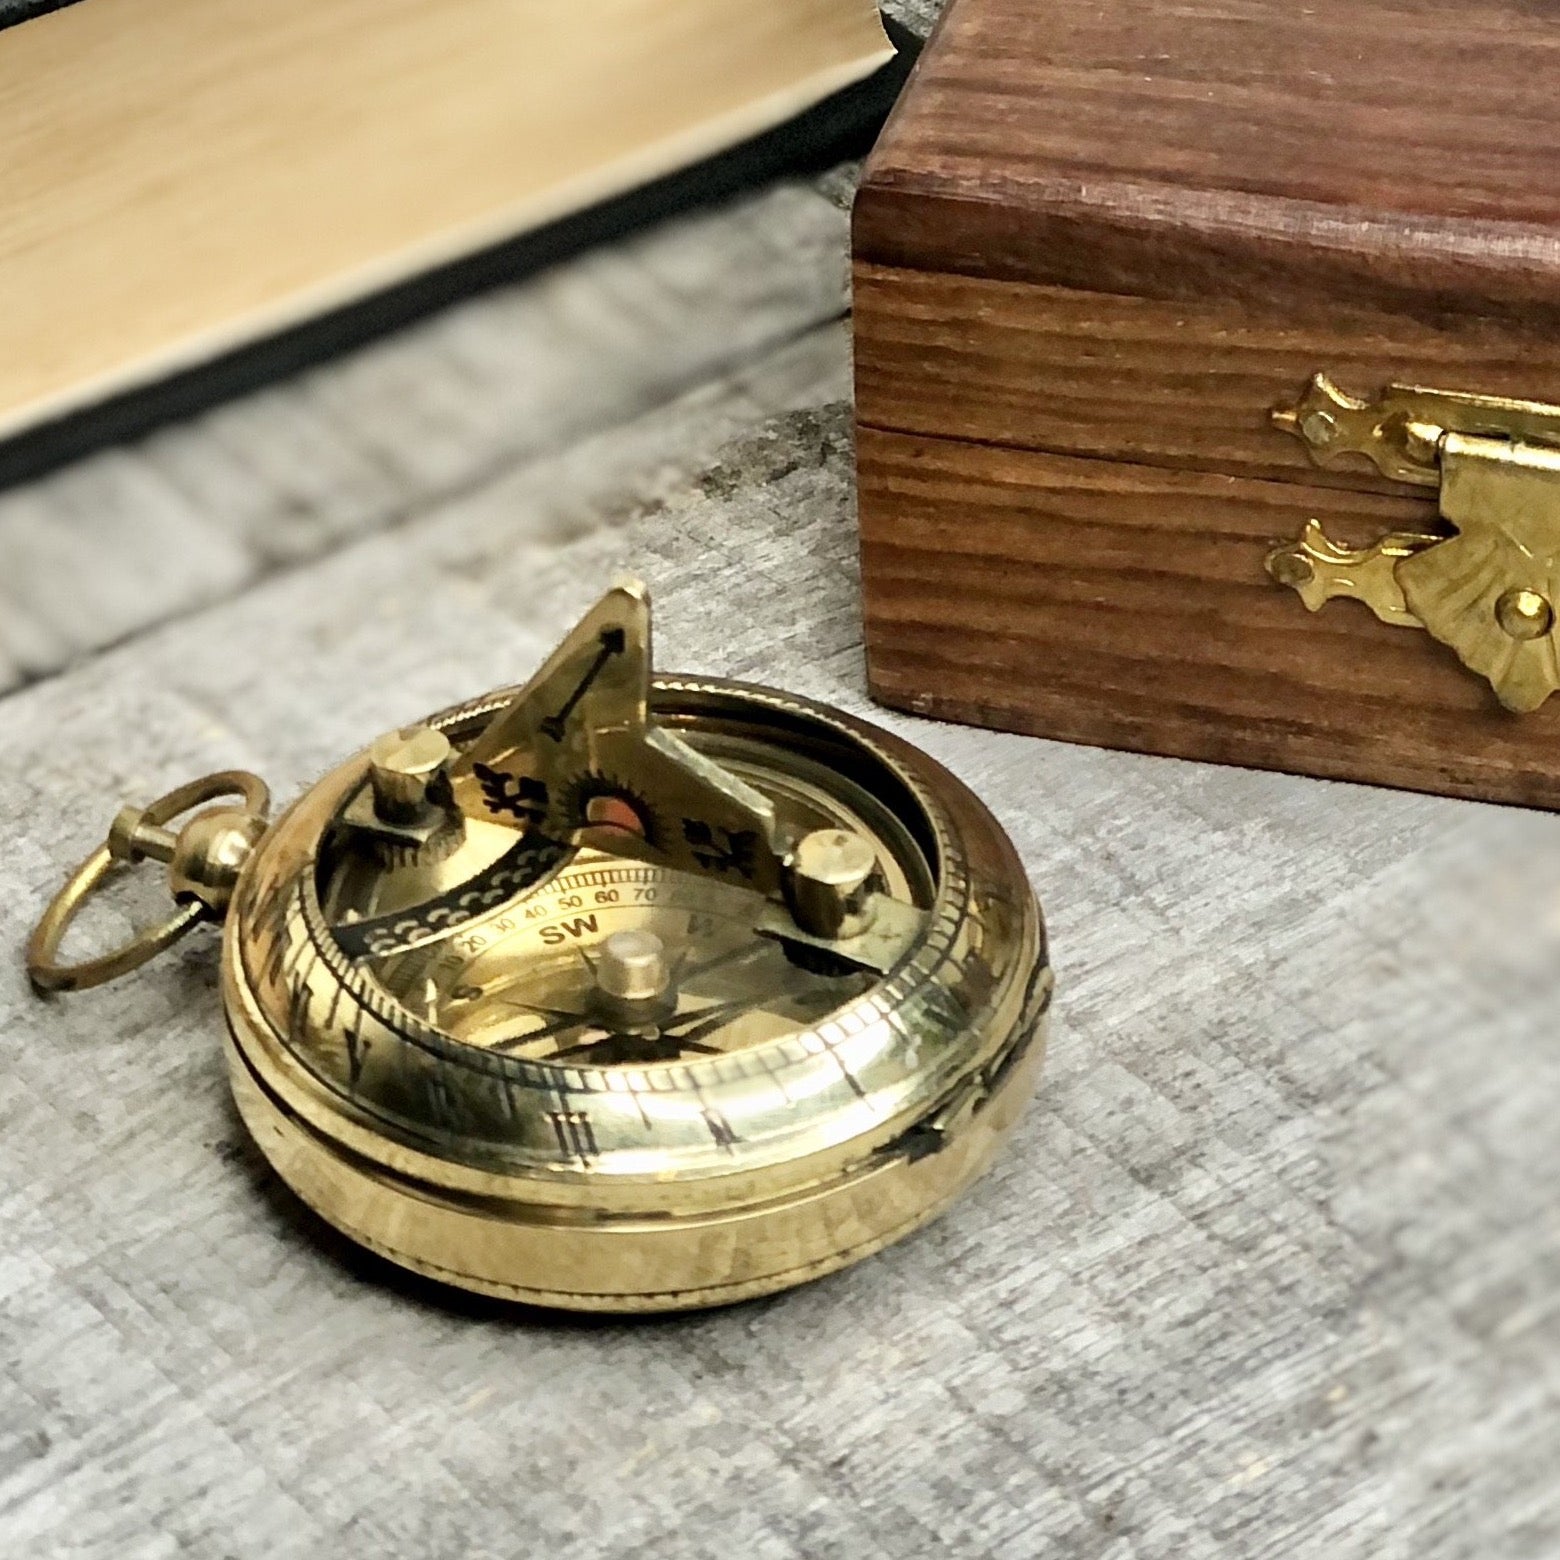 Brass Compass 2 Inch - Pocket Compass with Box